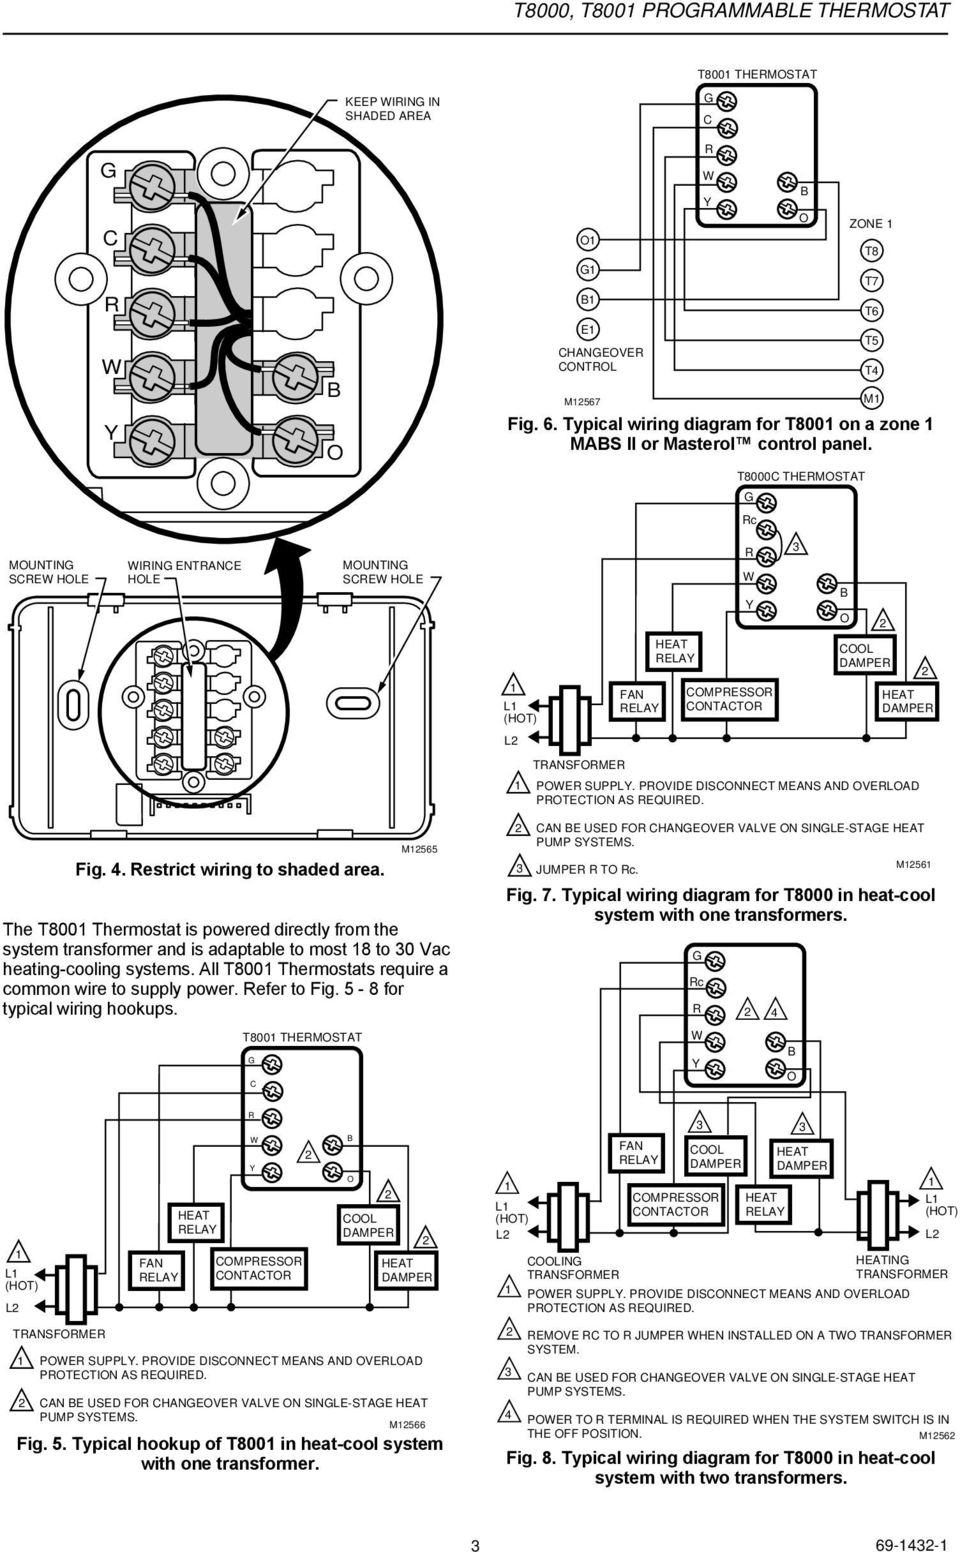 White-Rodgers 1F82-261 Heat Pump Thermostat Wiring Diagram from docplayer.net